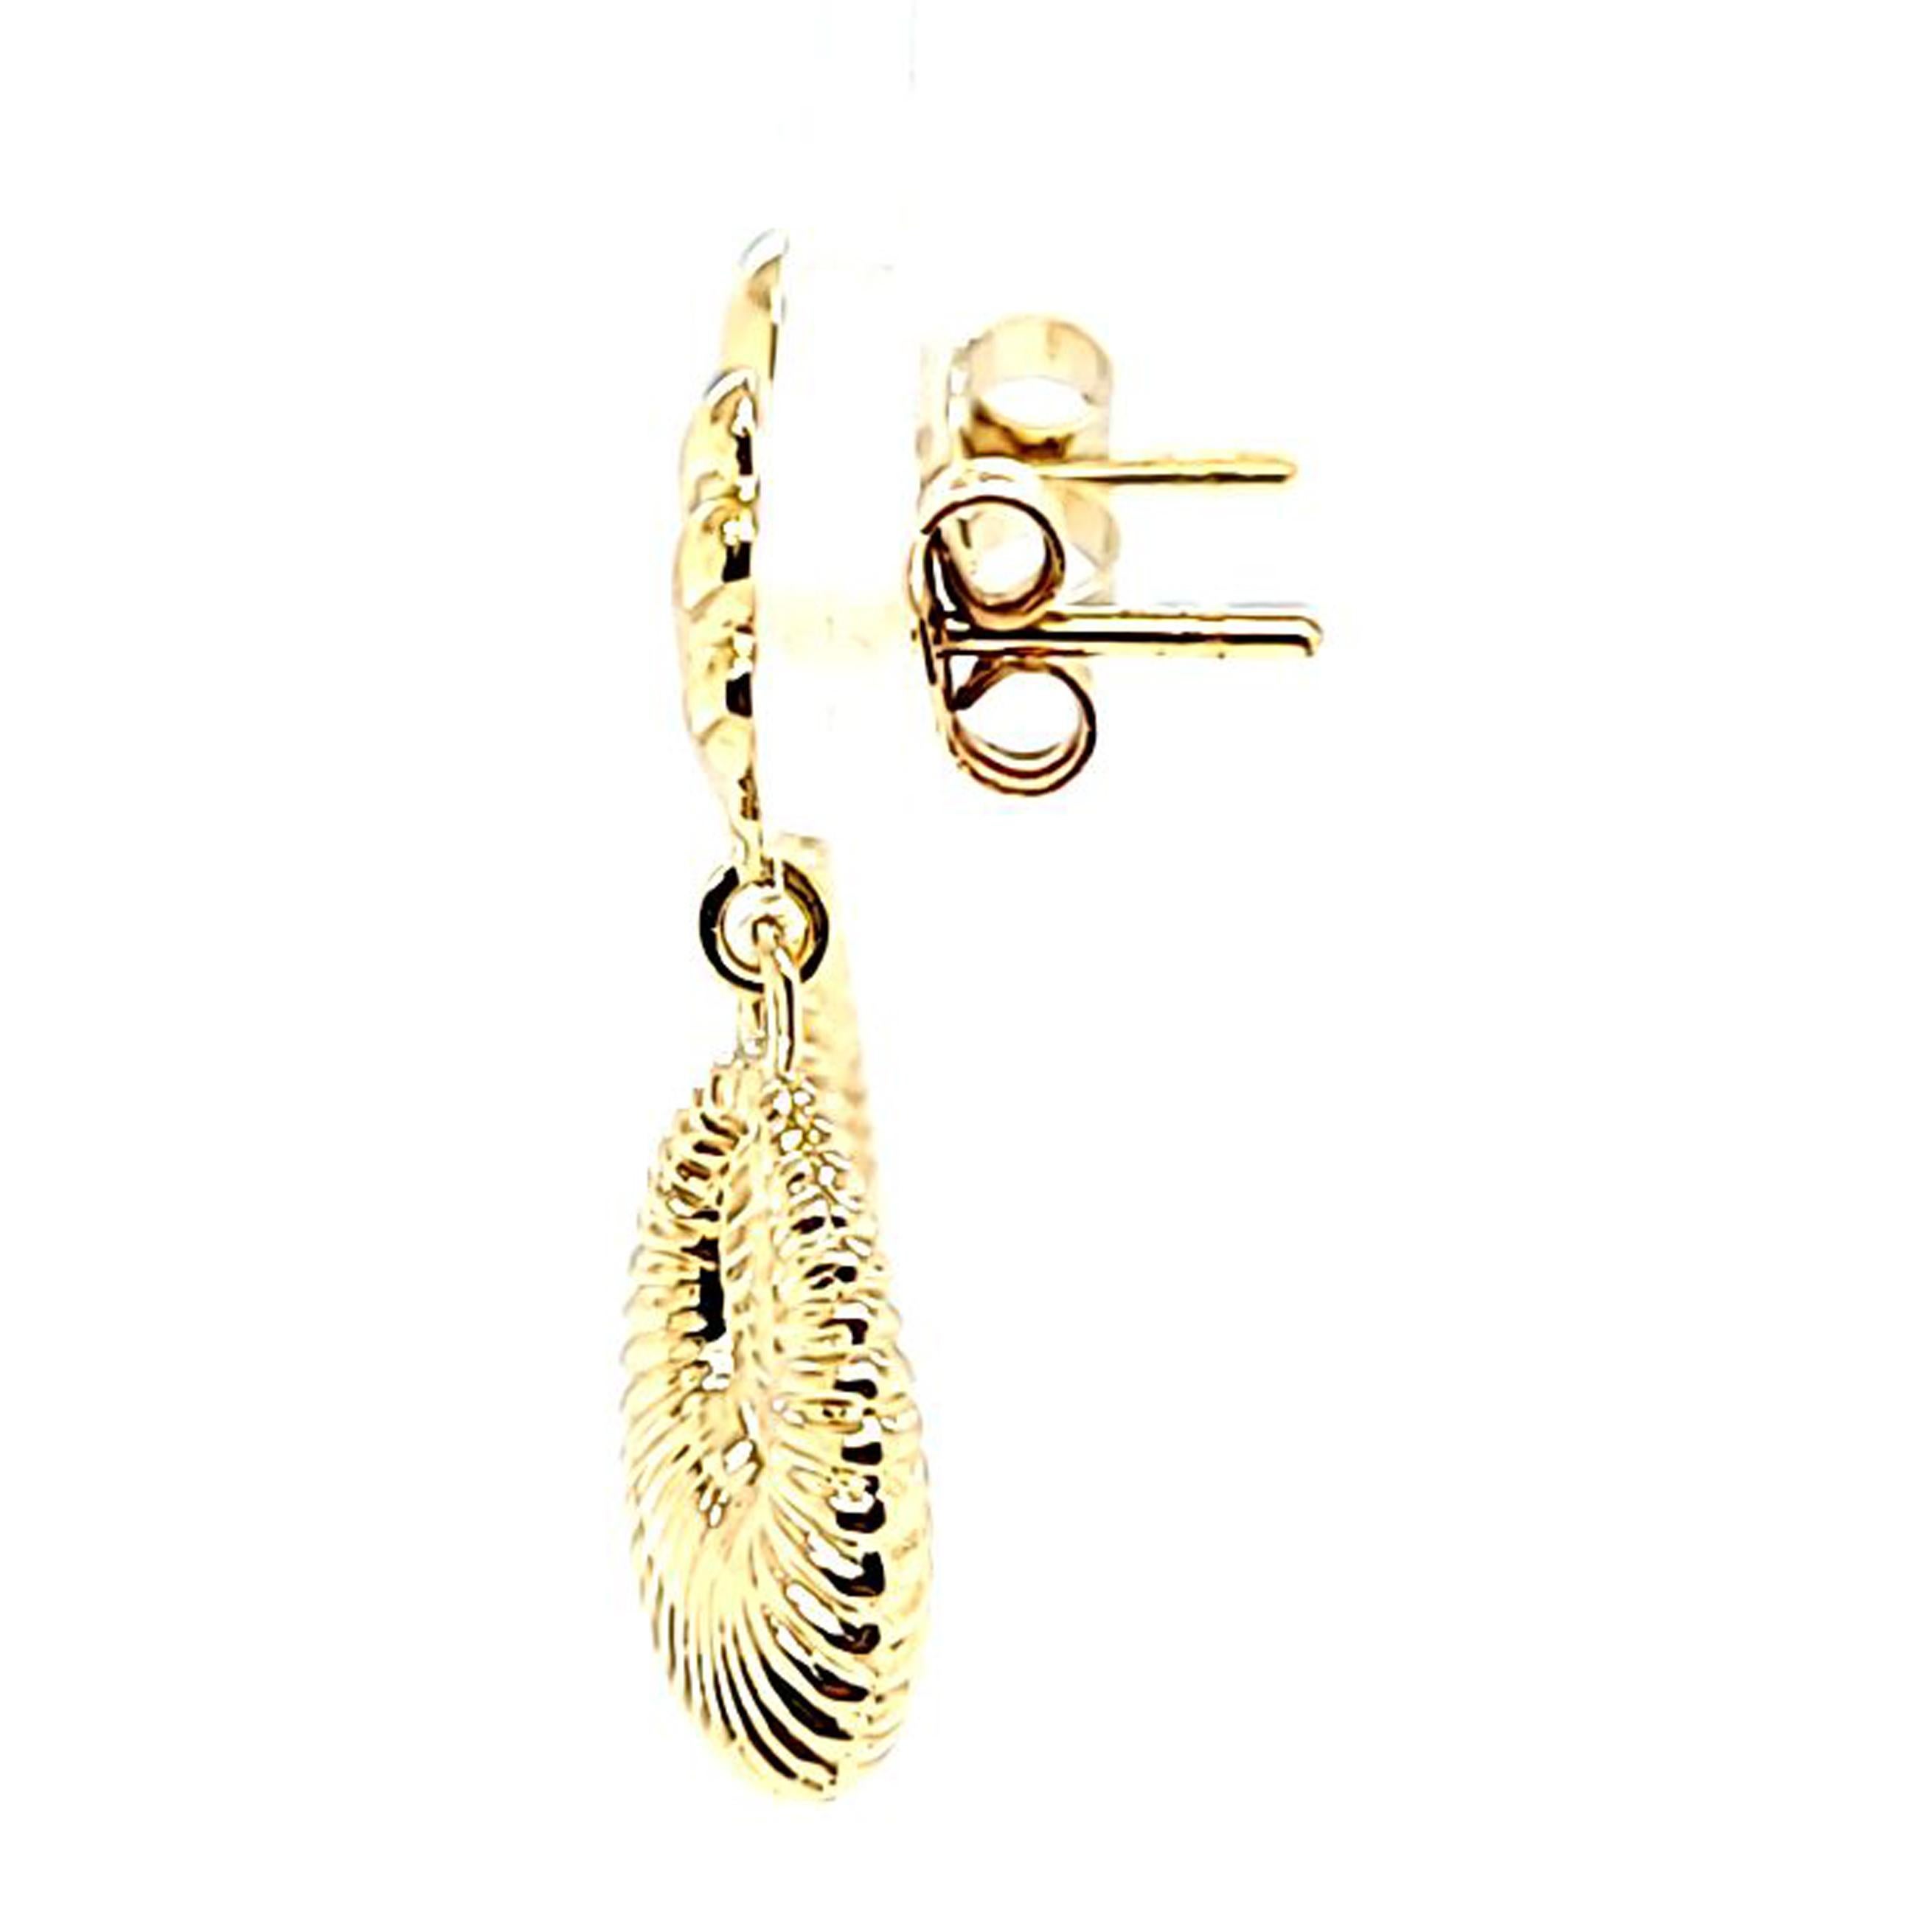 18 Karat Yellow Gold Lightweight Dangle Earrings Featuring A Ribbed Design. 1 Inch Long. Pierced Post with Friction Back. Finished Weight is 2.3 Grams.